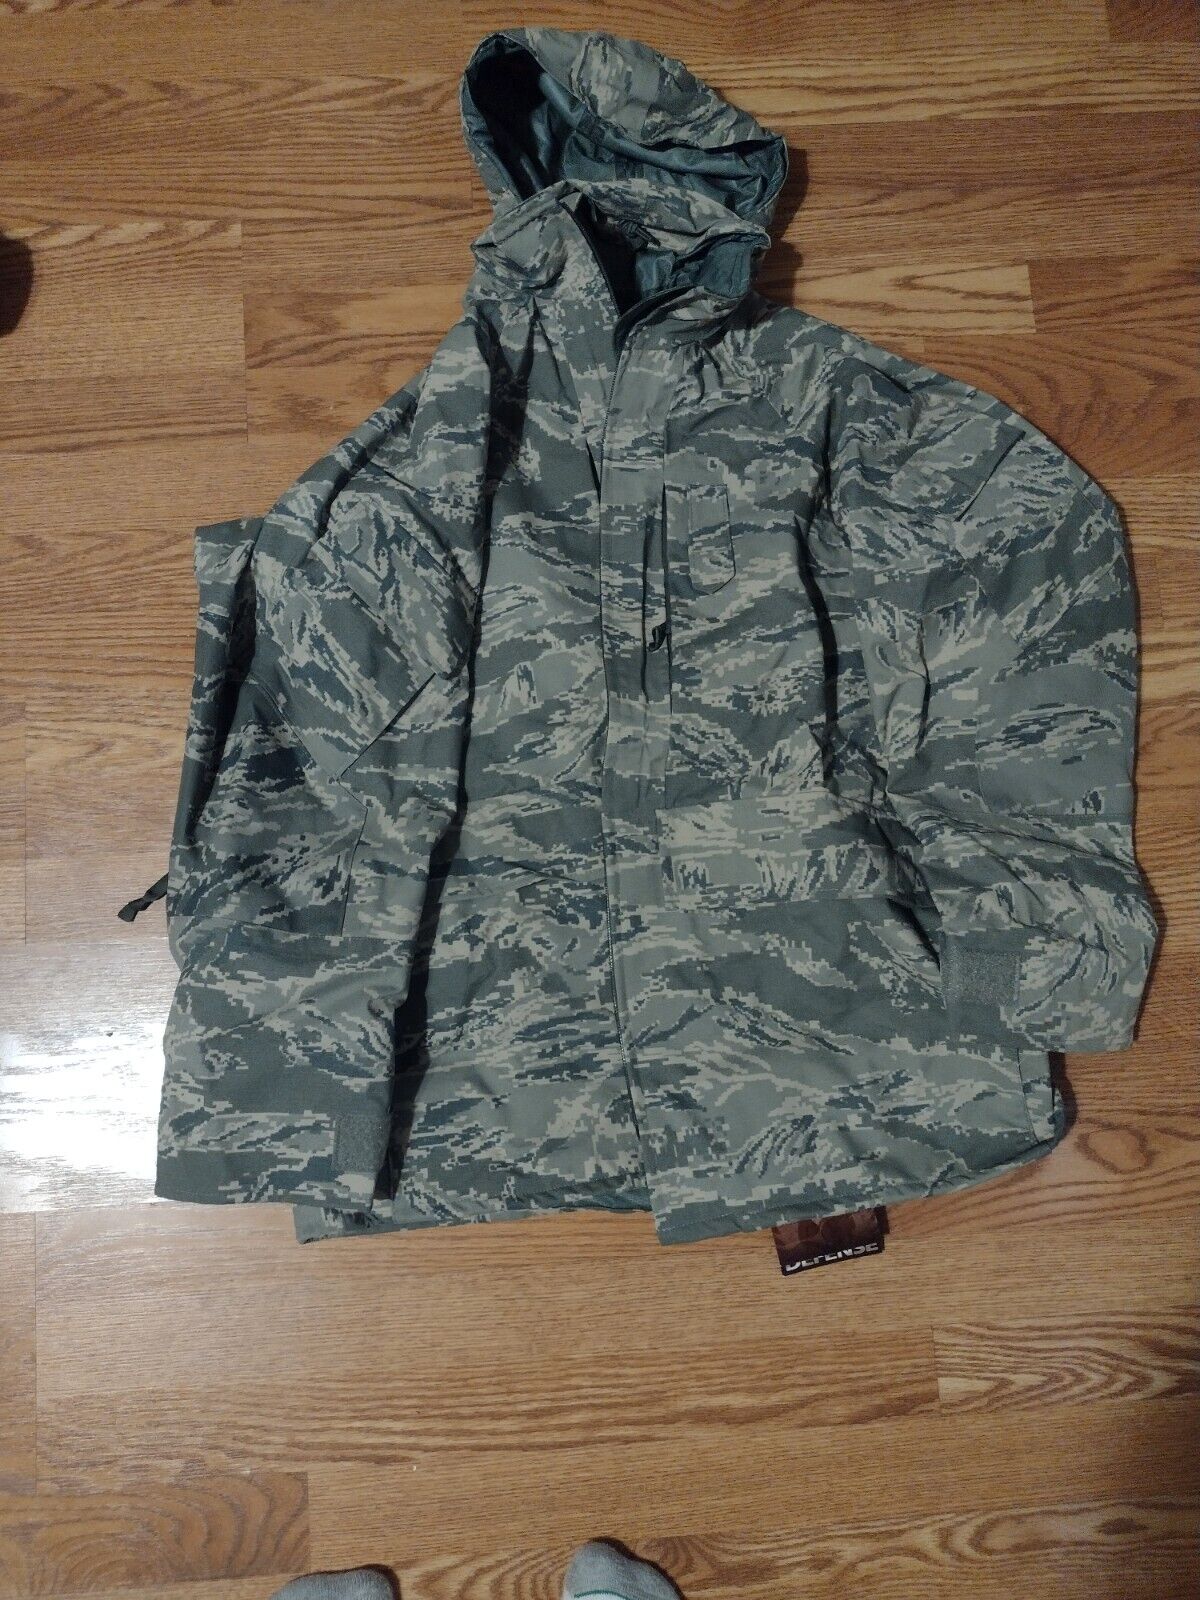 Military Large Short  Rain And Wind Resistant Jacket. New Never Worn.